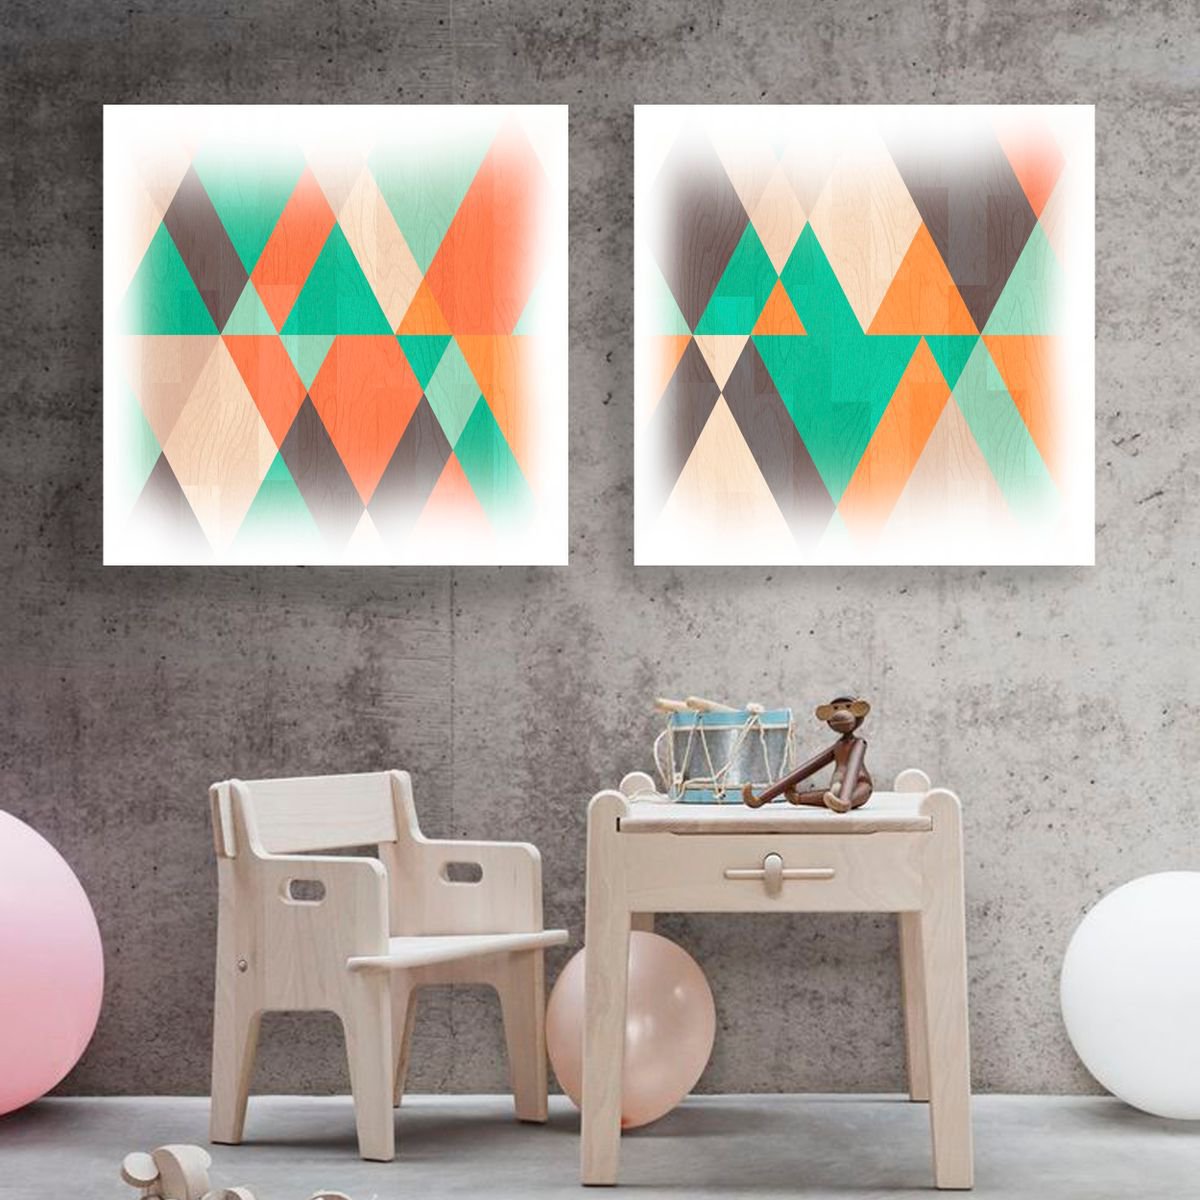 mid century modern art M004 - print on canvas 60x120x4cm - set of 2 canvases by Kuebler